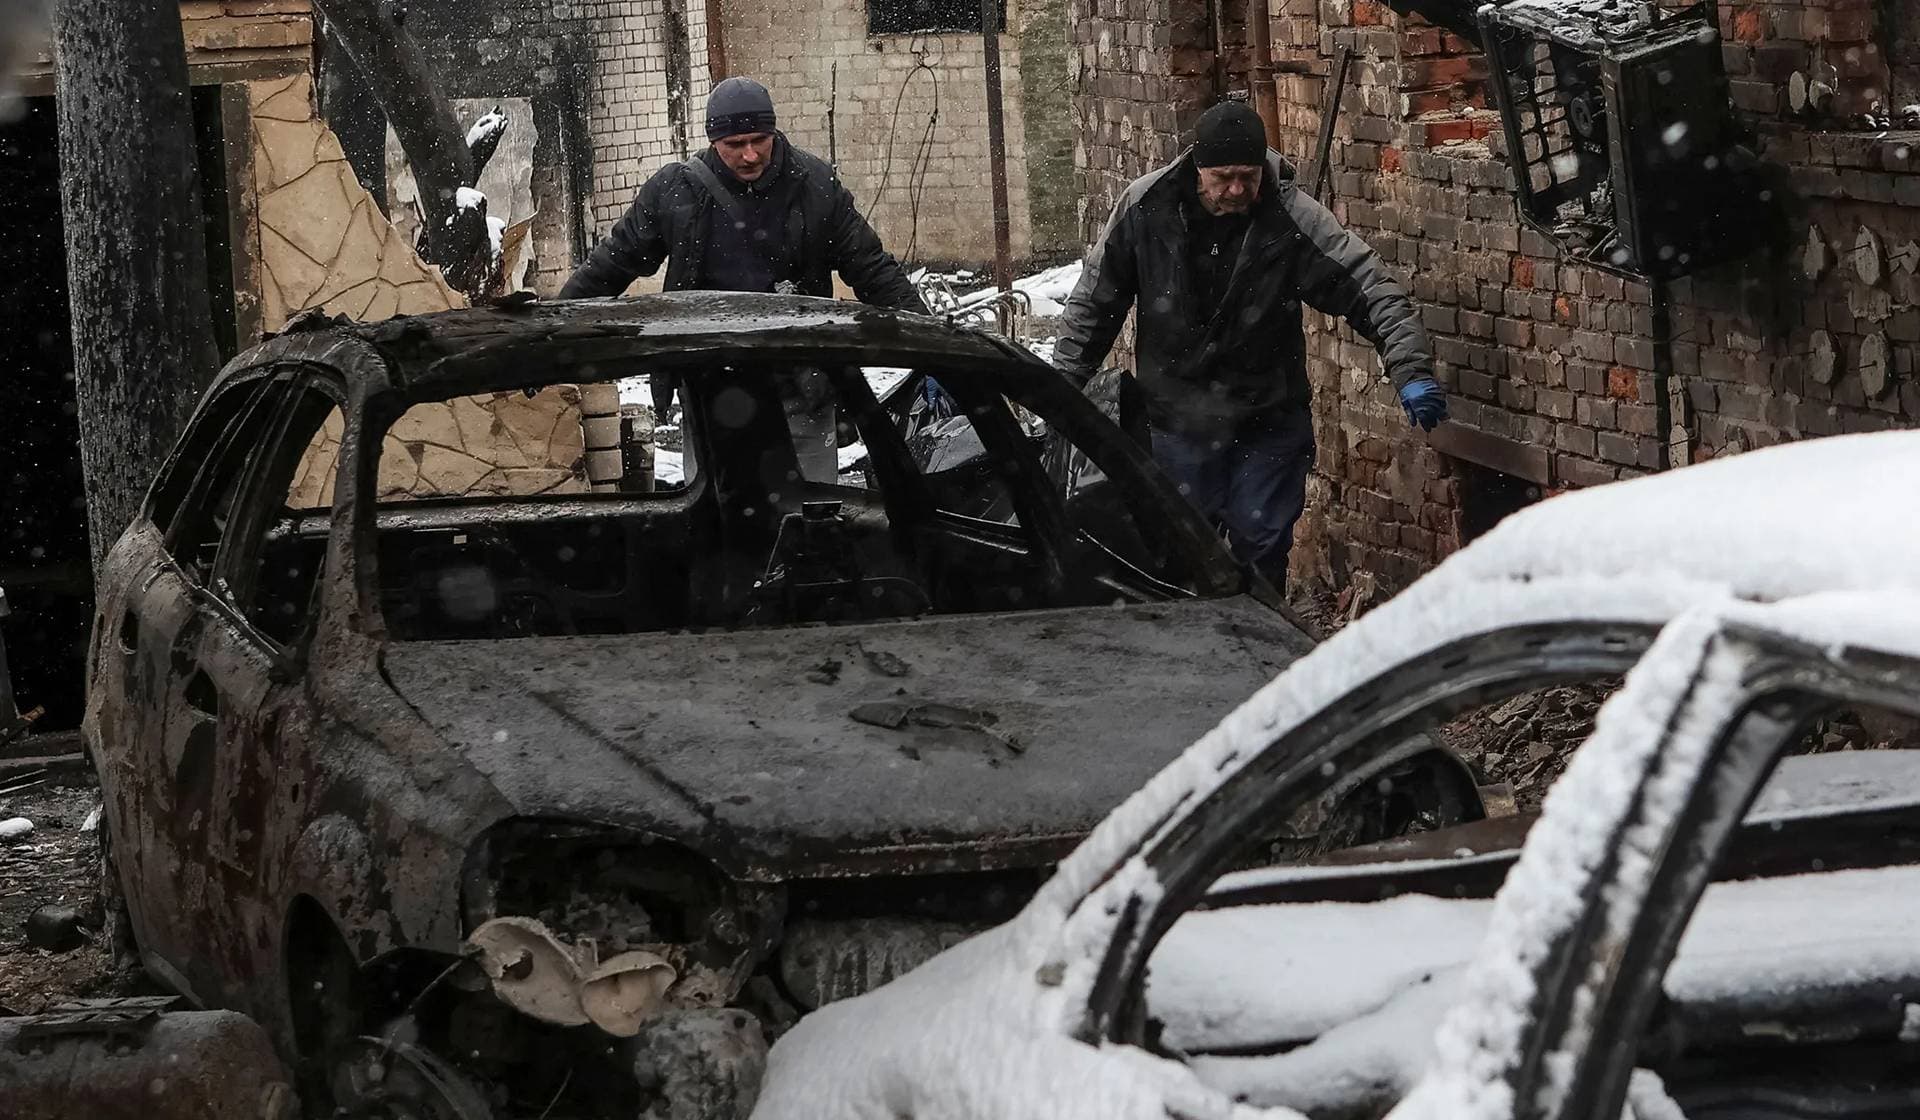 Workers evacuate the body of a local resident from a burned house at the site of a Russian drone strike in Kharkiv